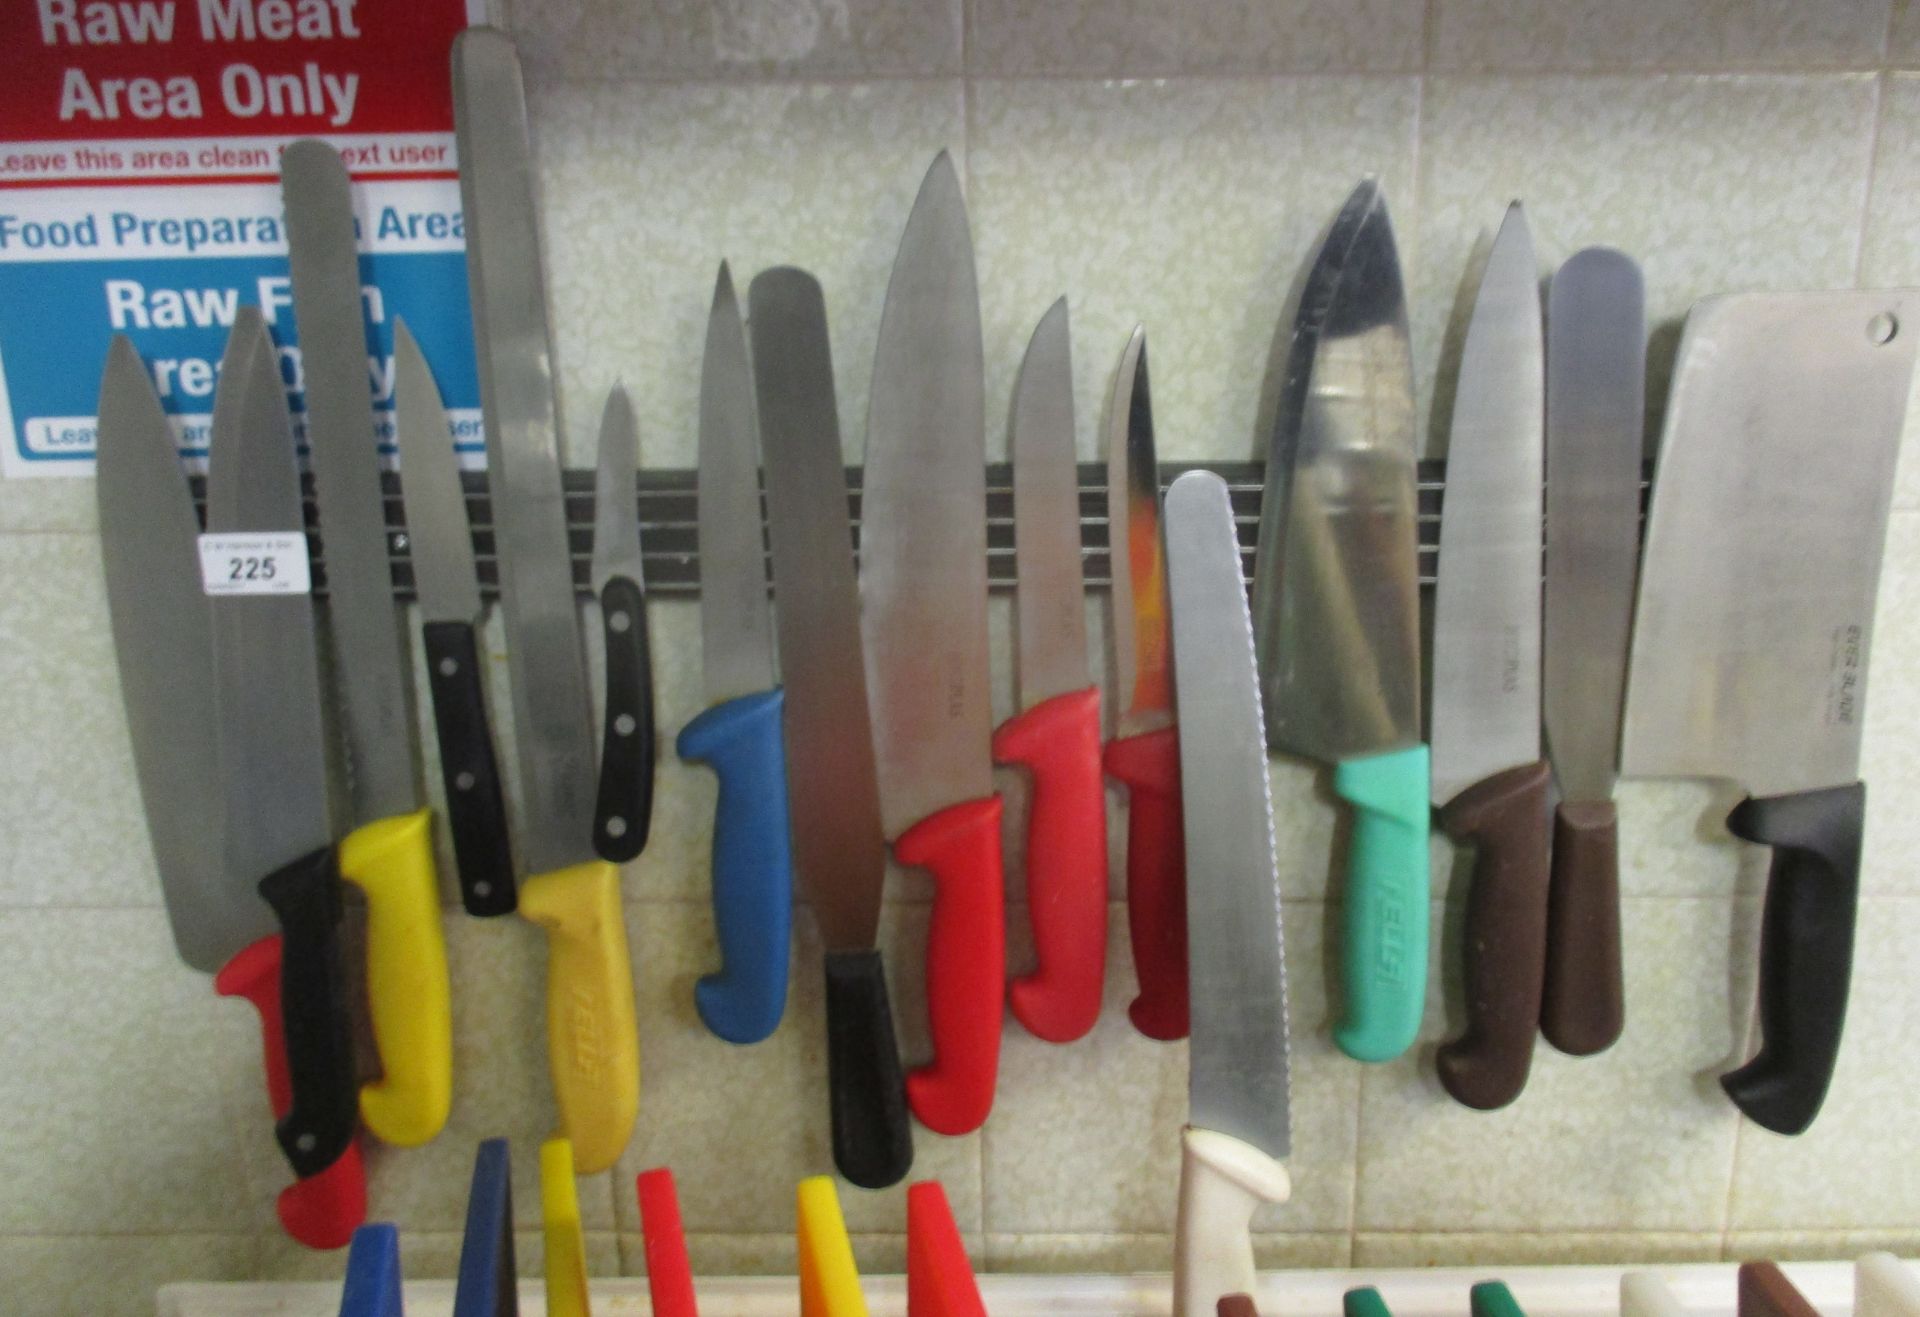 16 x assorted chefs' knives and 3 magnetic wall racks.